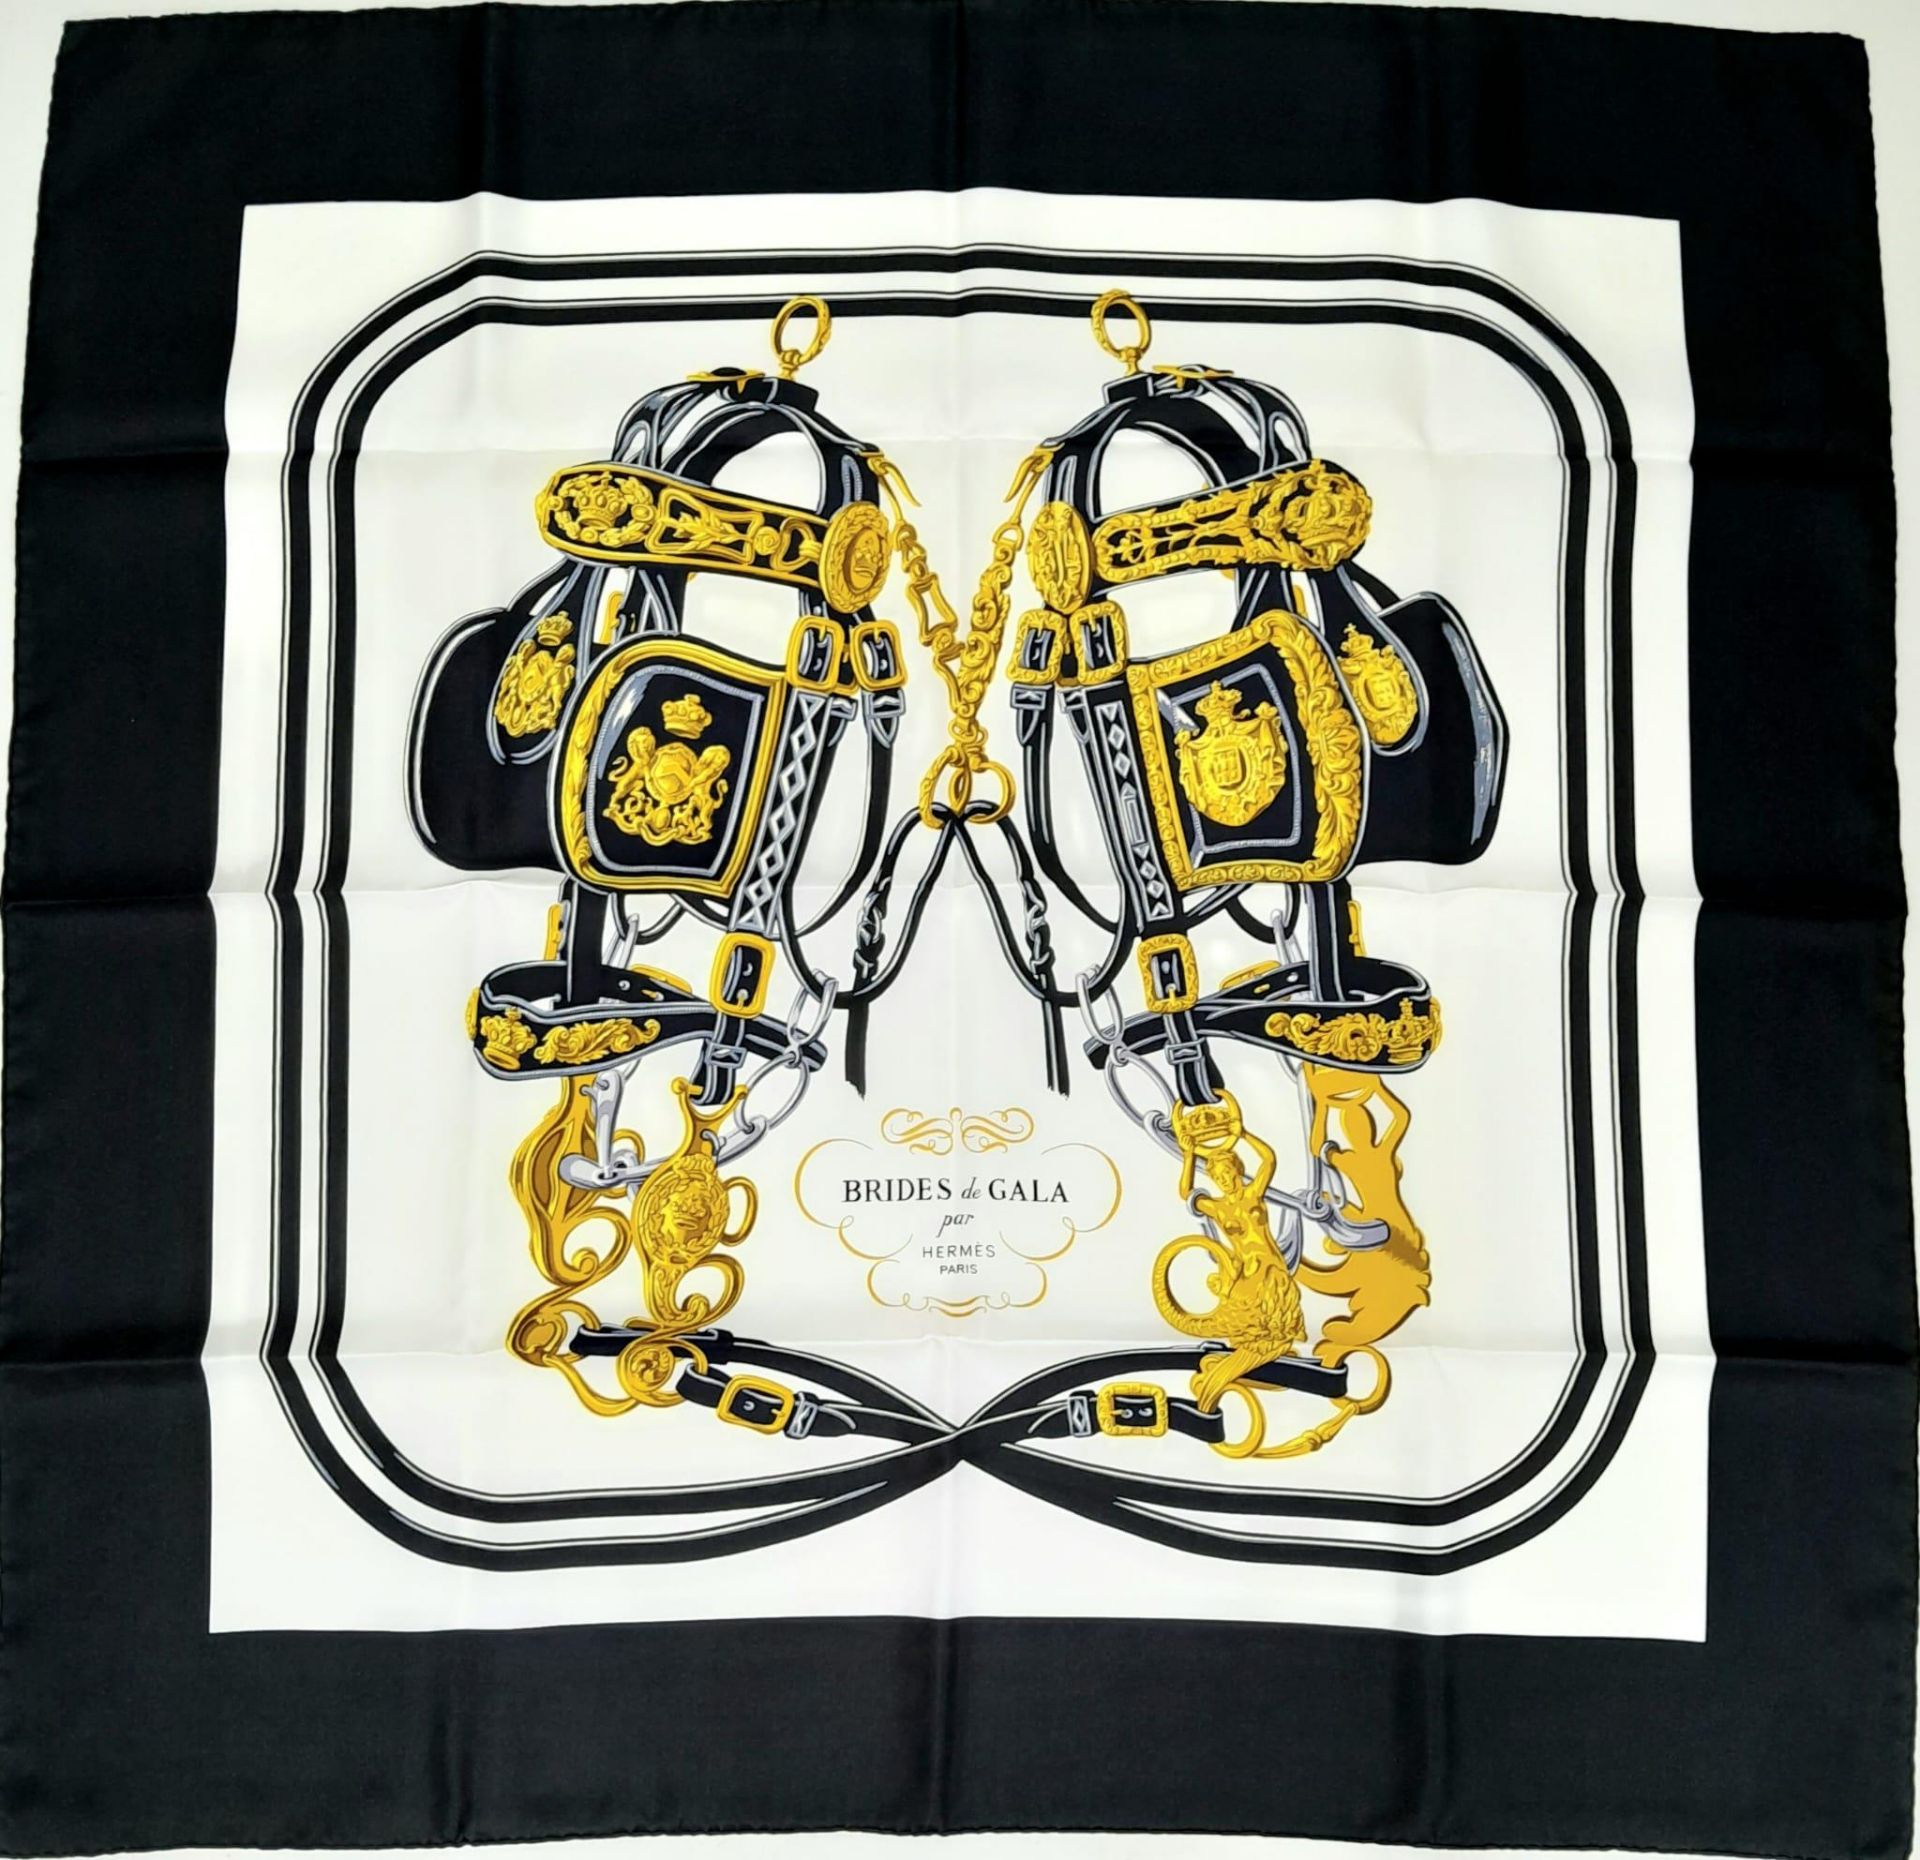 A Hermes Carre Silk Scarf "Brides de Gala" in Black, White and Gold Equestrian Print, features a